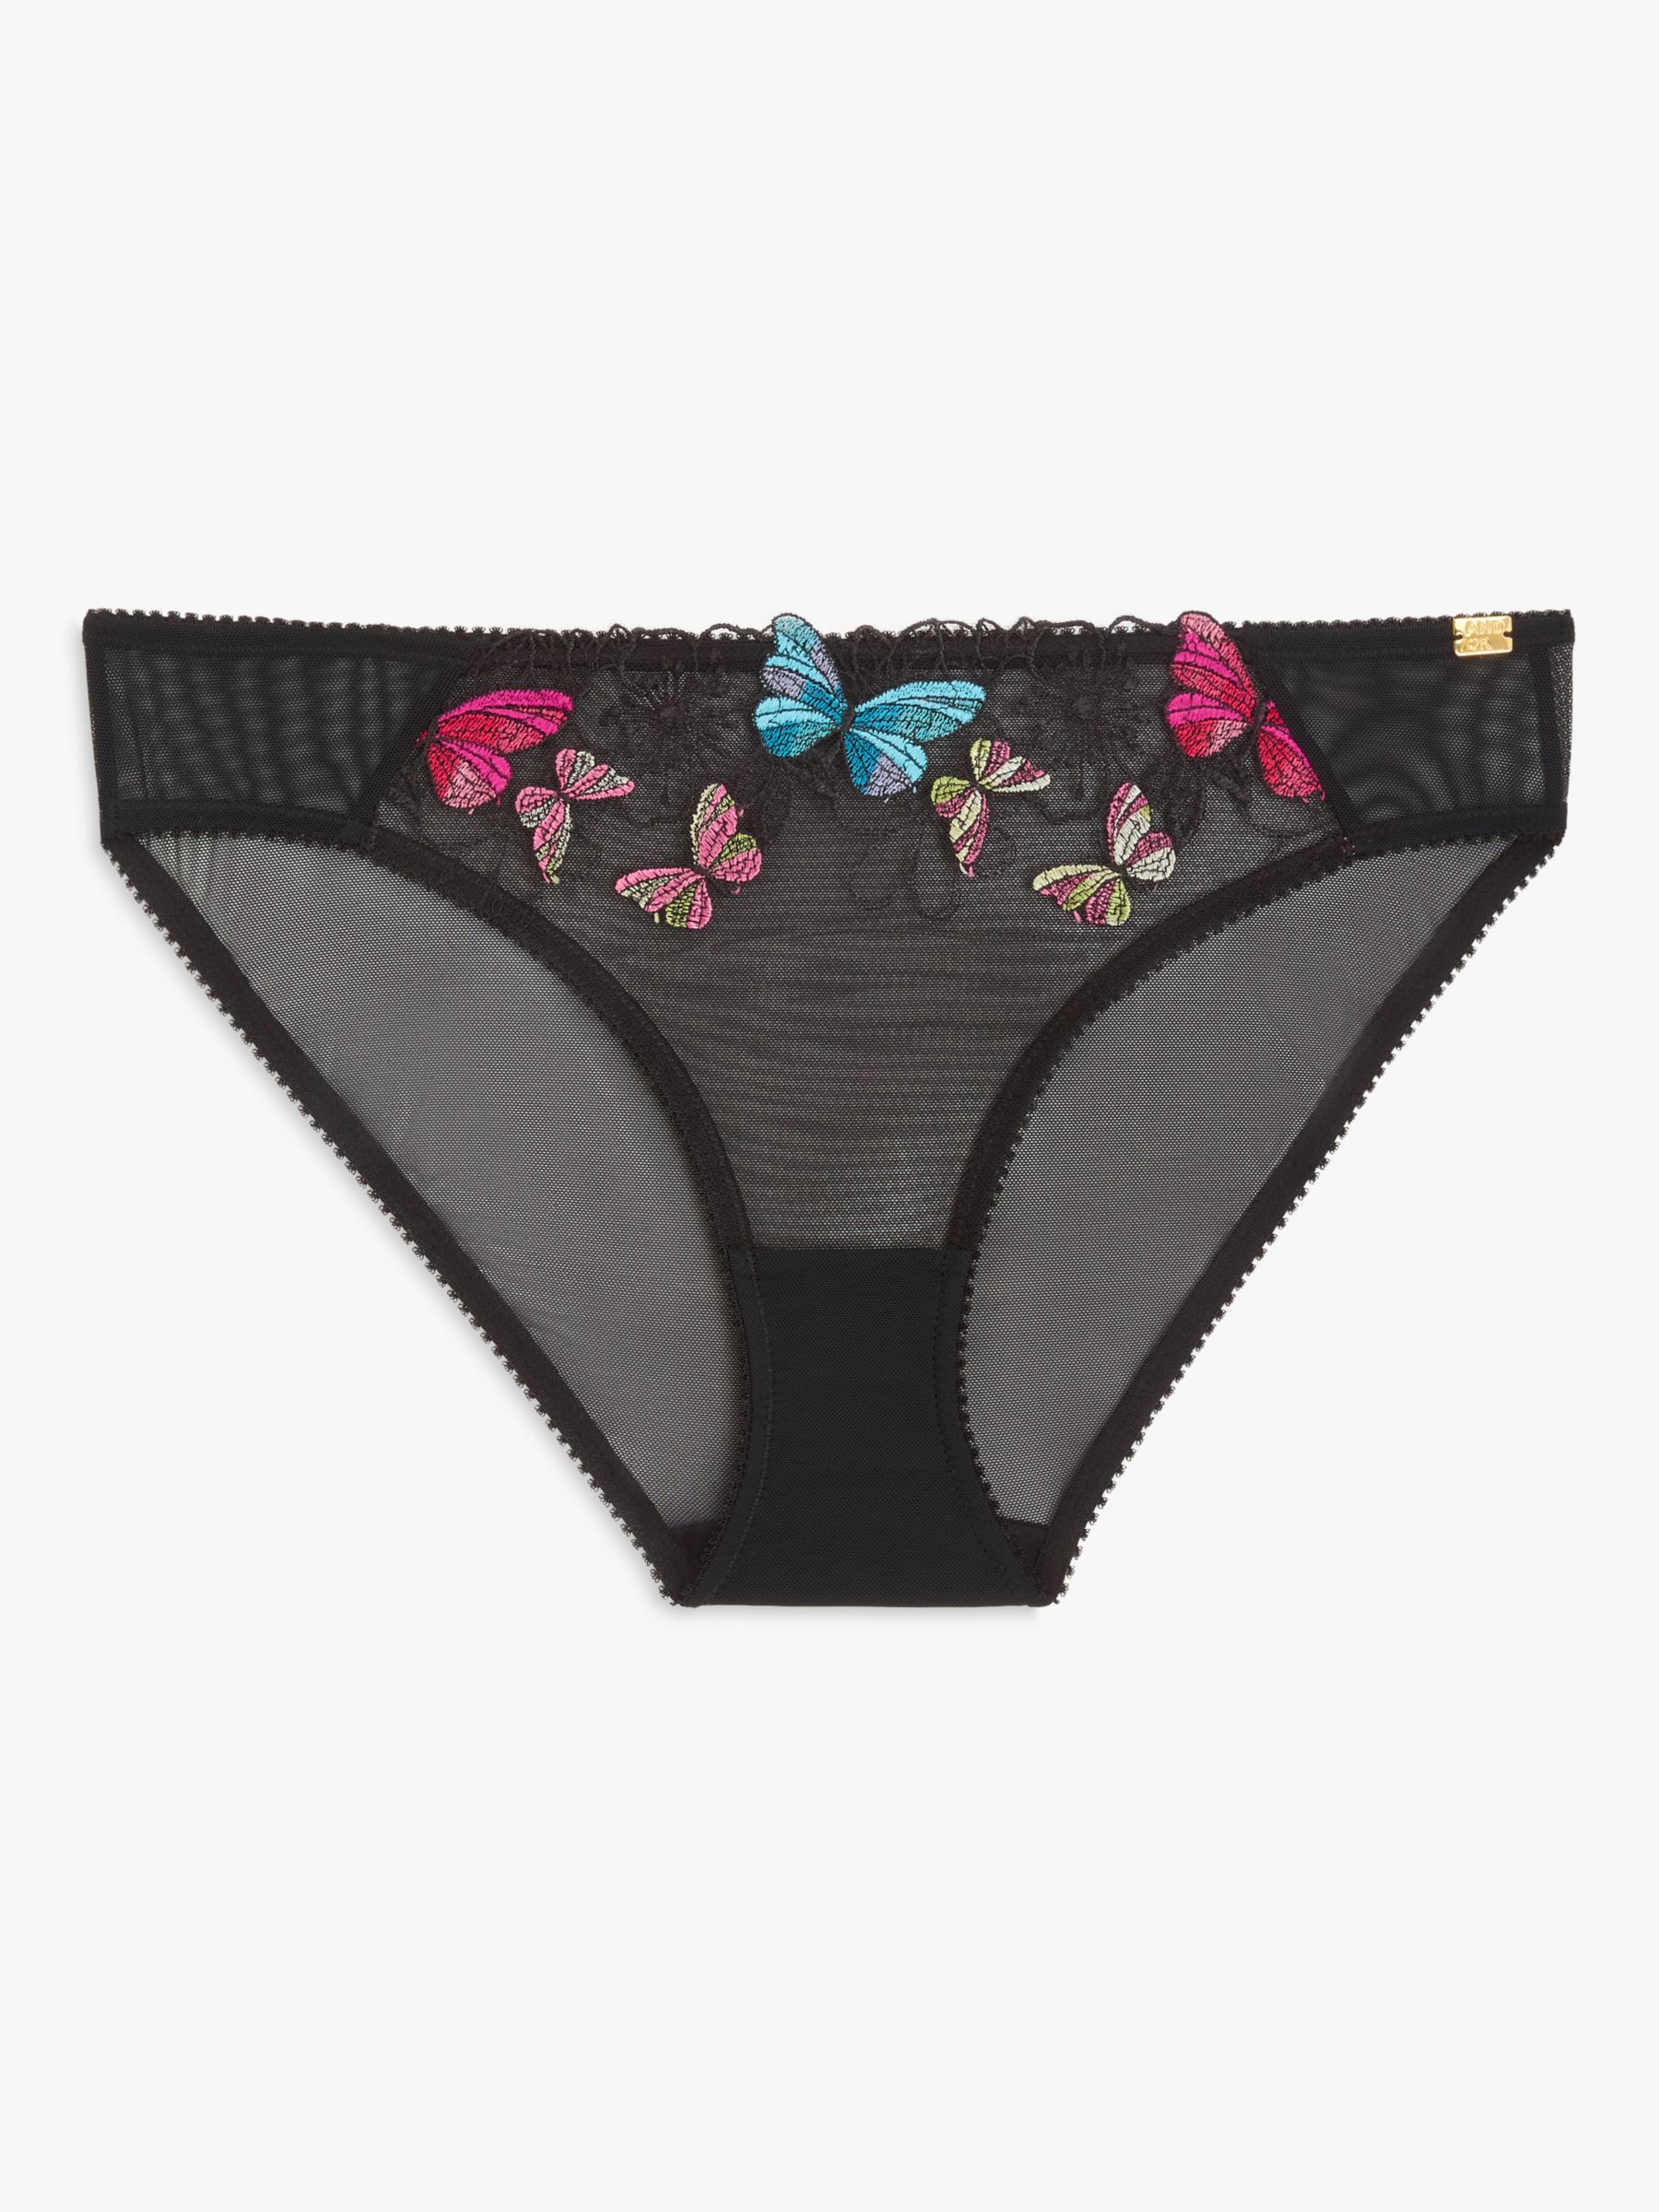 AND/OR Kiki Butterfly Embroidered Knickers, Black, 8